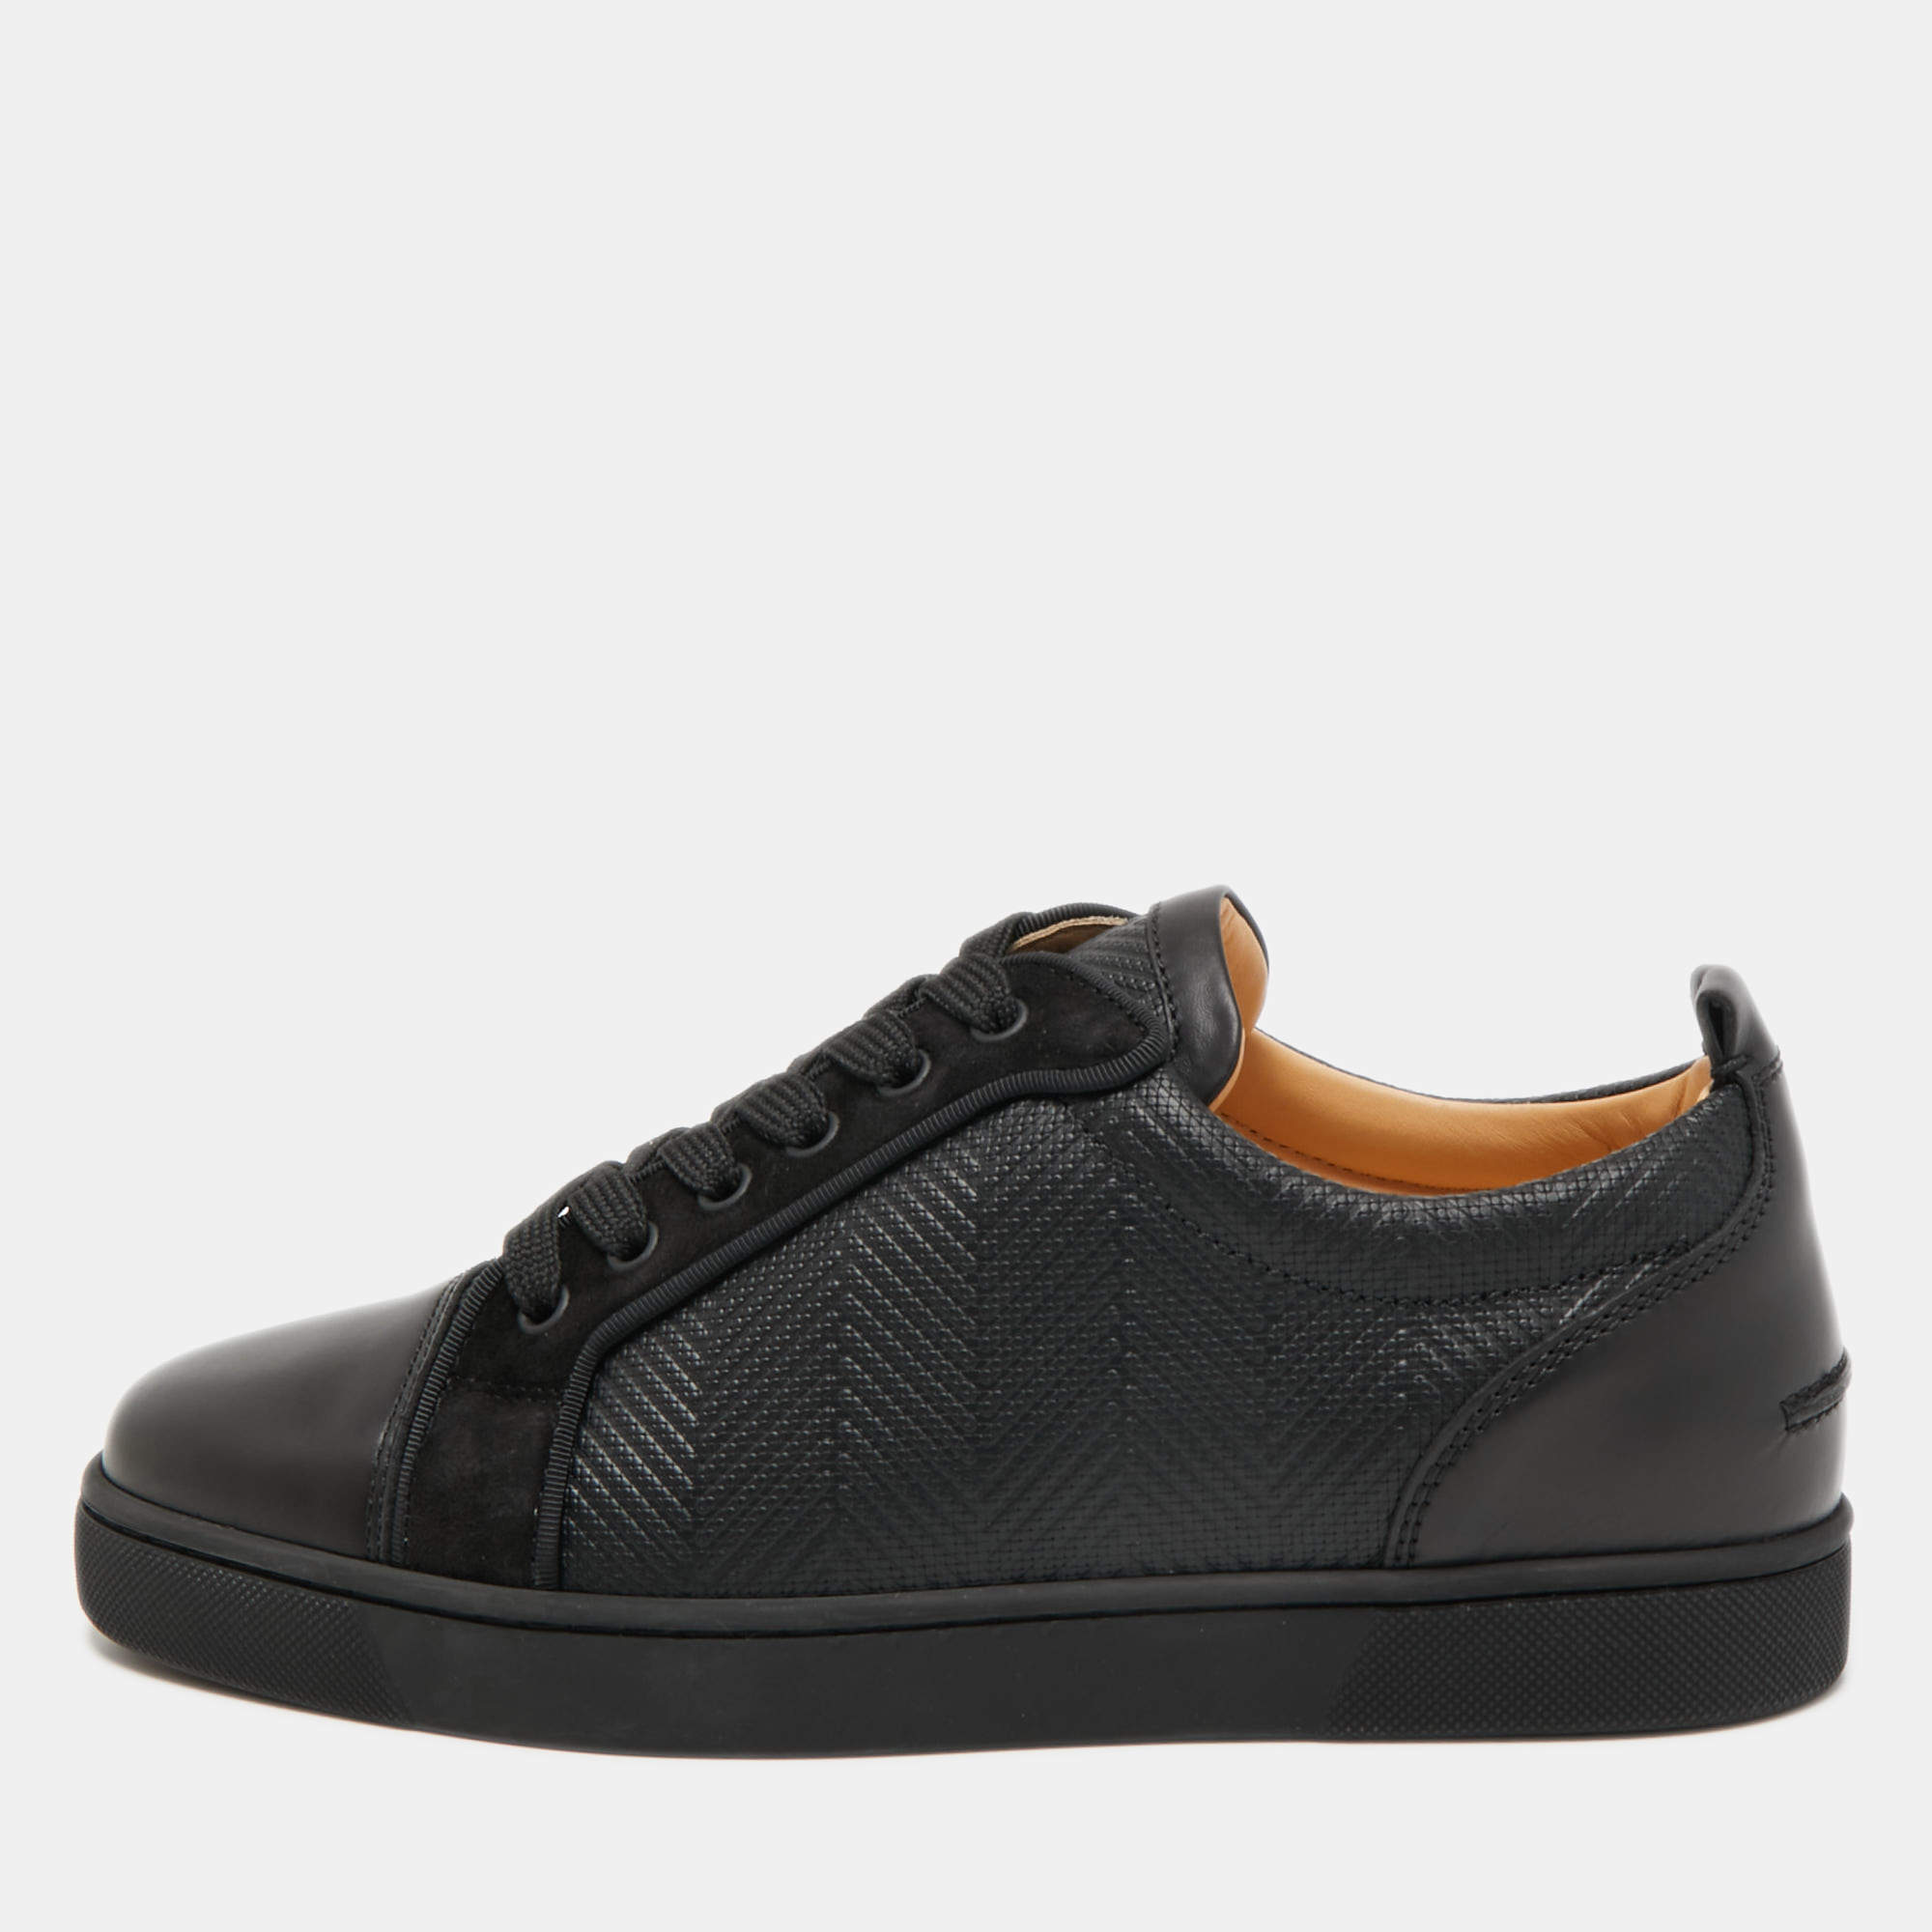 Christian Louboutin Black Leather Junior Low Top Sneakers Size 40 Christian Louboutin |